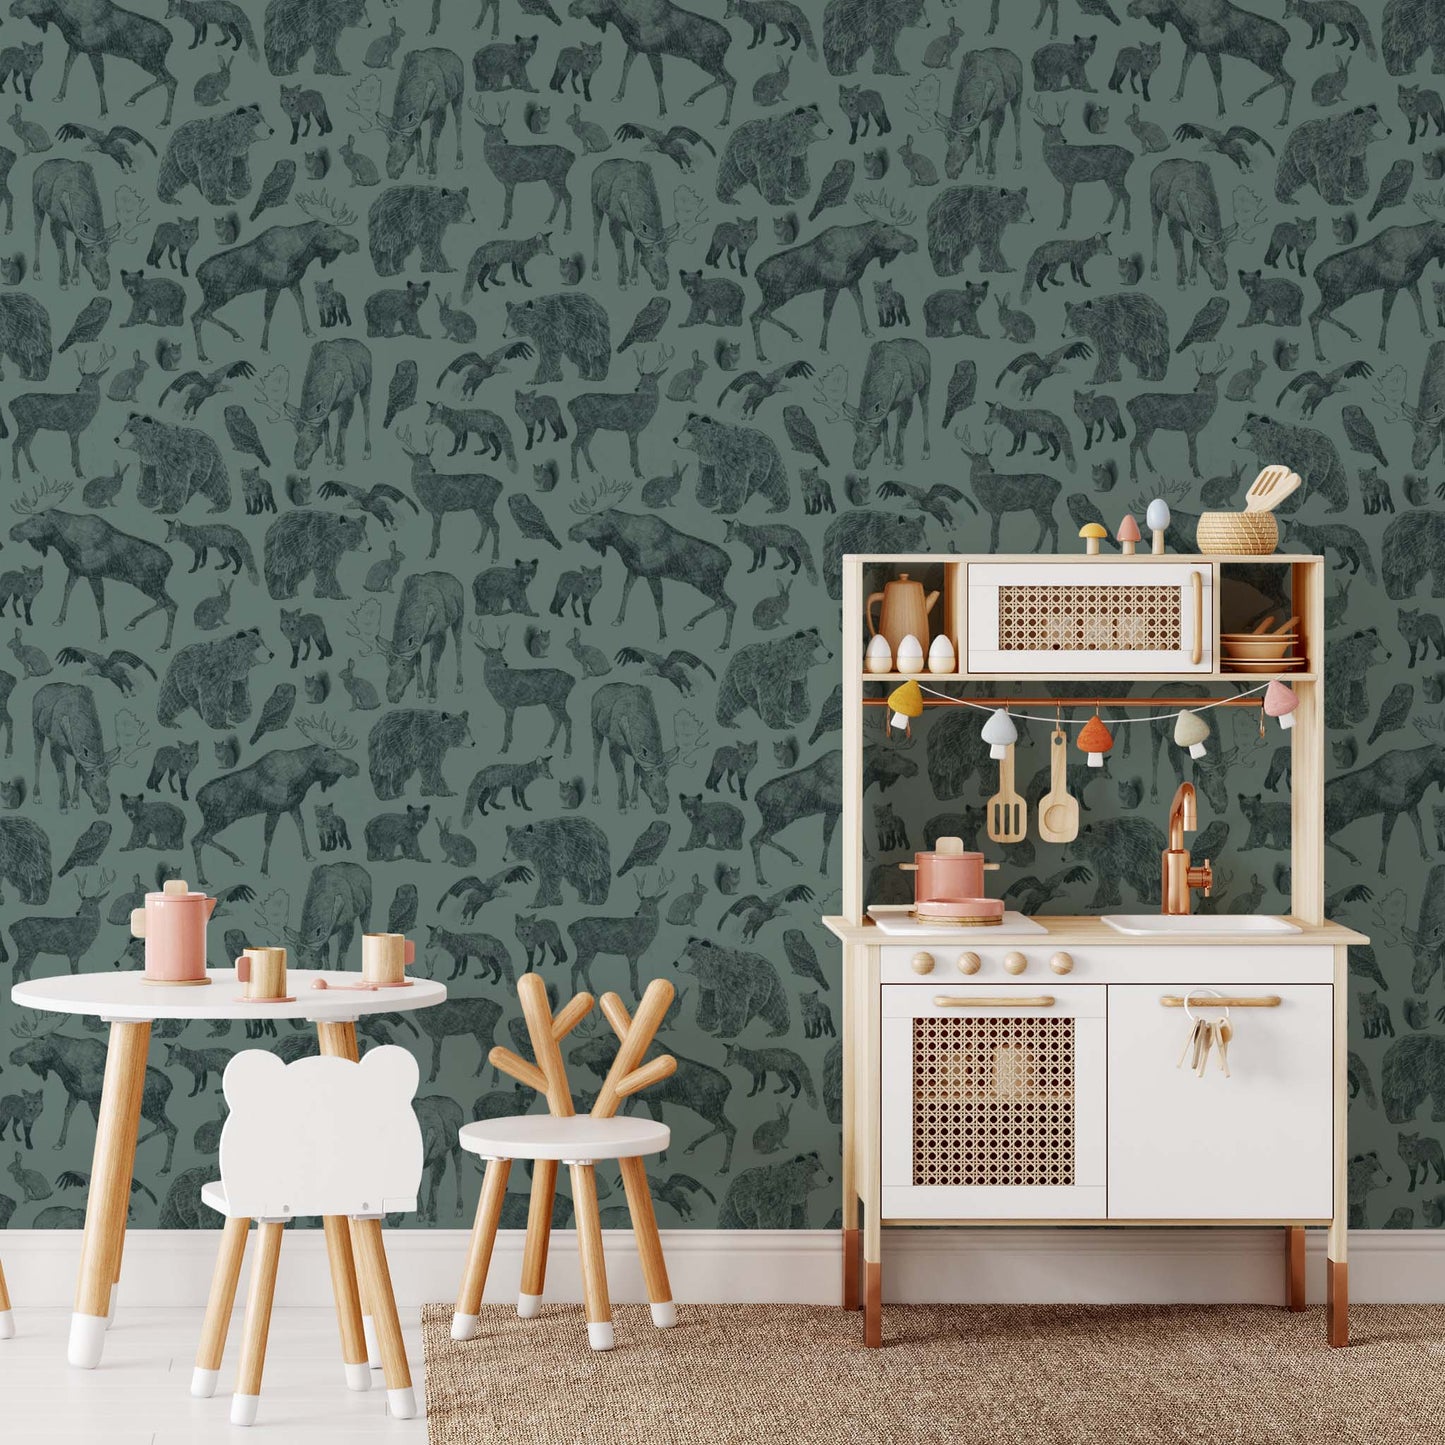 Bedroom featuring Cayla Naylor Kenai- Cyprus Peel and Stick Wallpaper - a nature inspired pattern